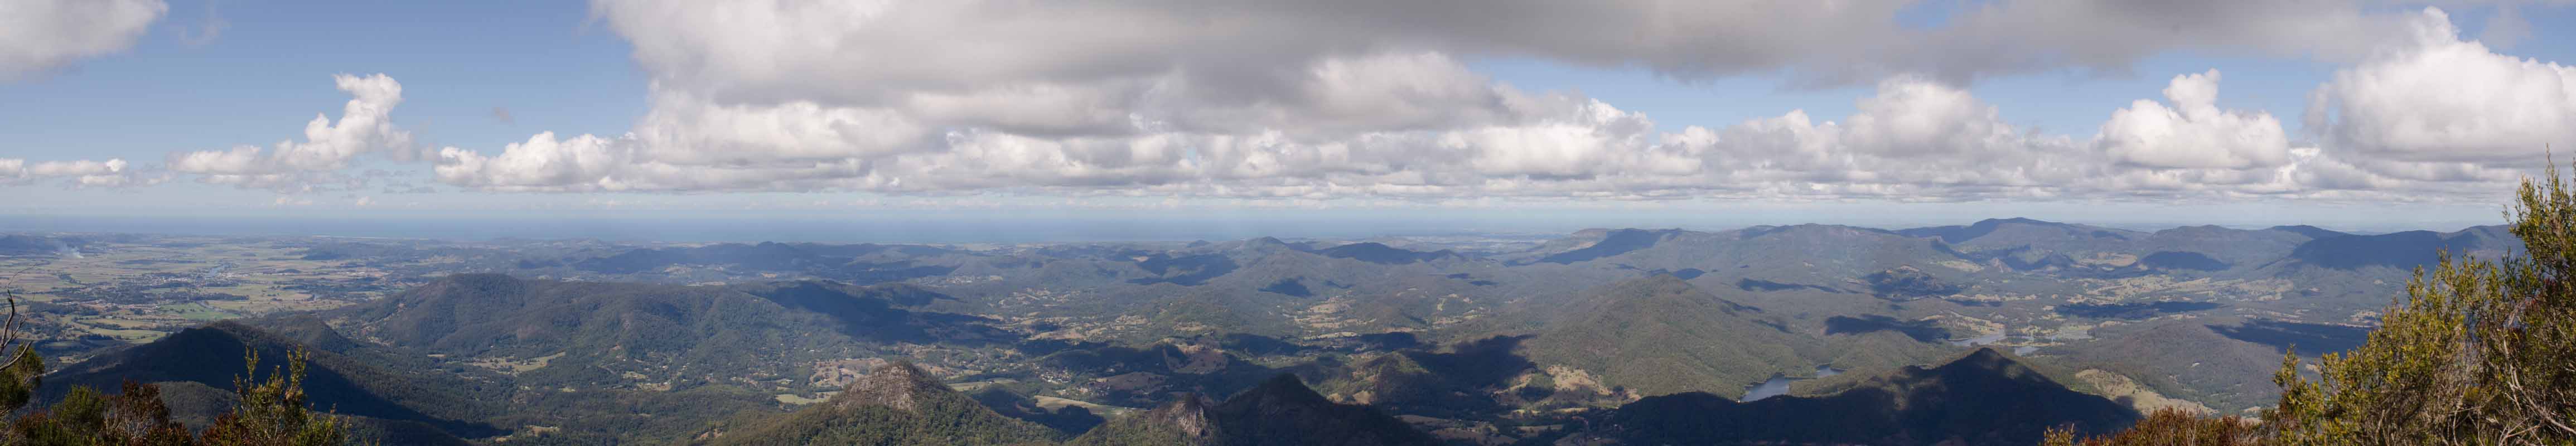 View from Mount Warning